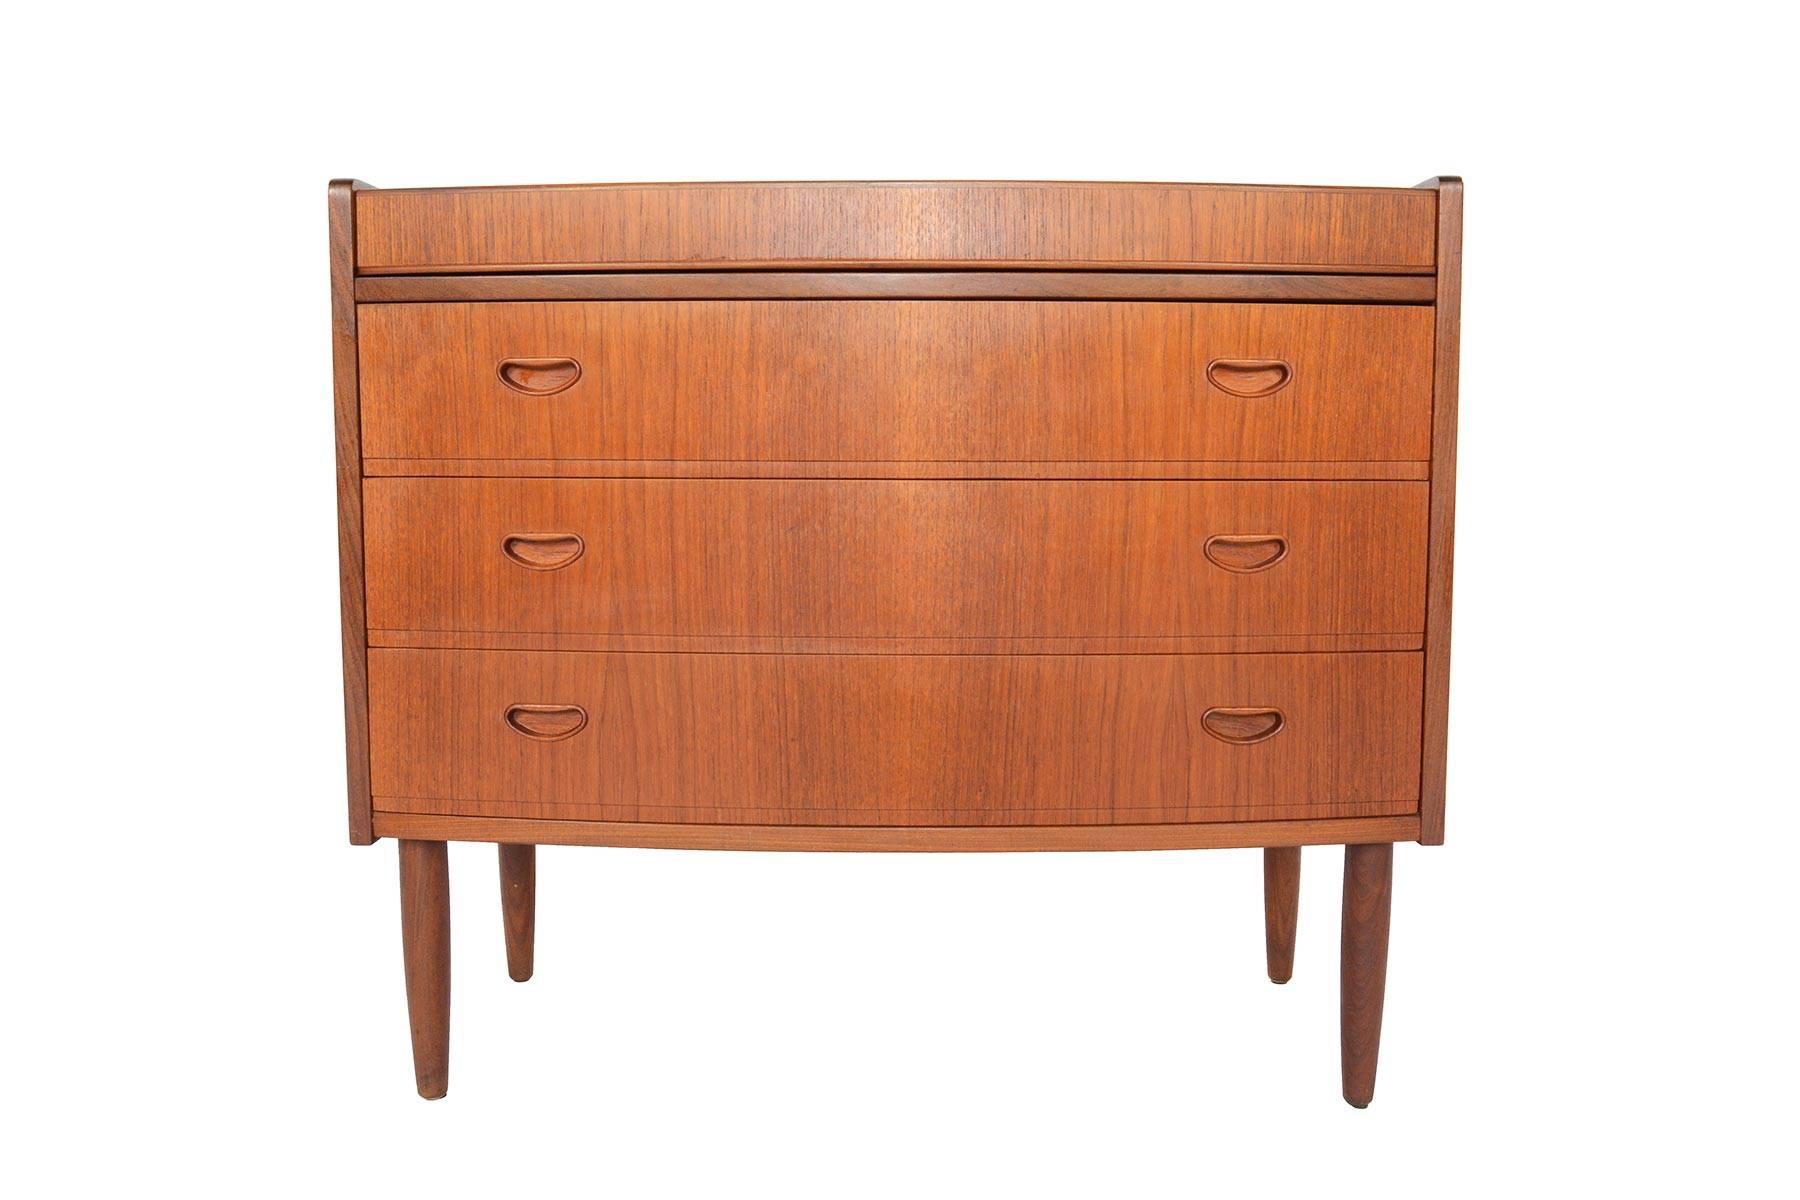 This gorgeous flip top Danish modern secretary desk or vanity will work beautifully in any modern bedroom or entry. Crafted in teak, this well built piece easily converts from a small gentleman's chest to a full vanity in seconds. When opened, three